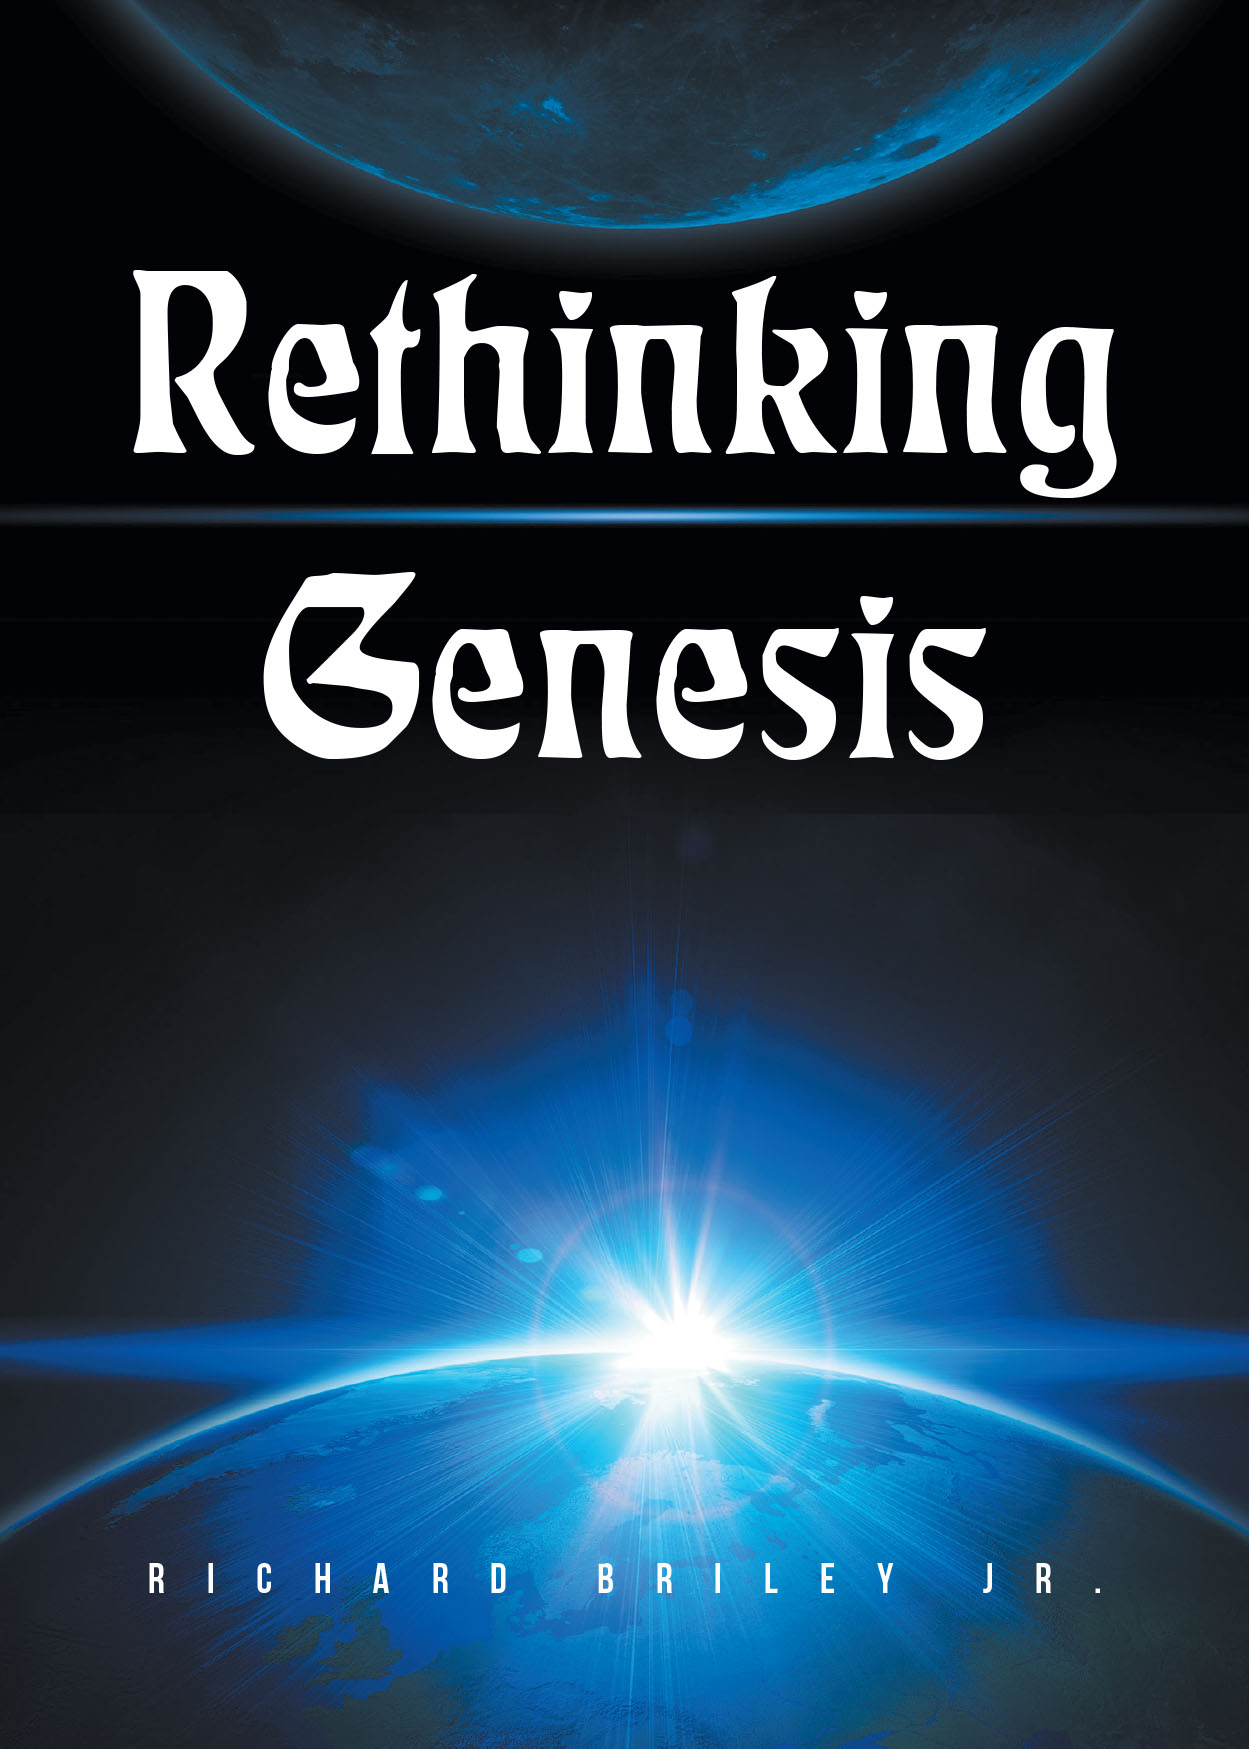 Richard Briley Jr.’s New Book, "Rethinking Genesis," is a Thought-Provoking Read That Confronts Age-Old Questions About the Validity of the First Book of the Bible